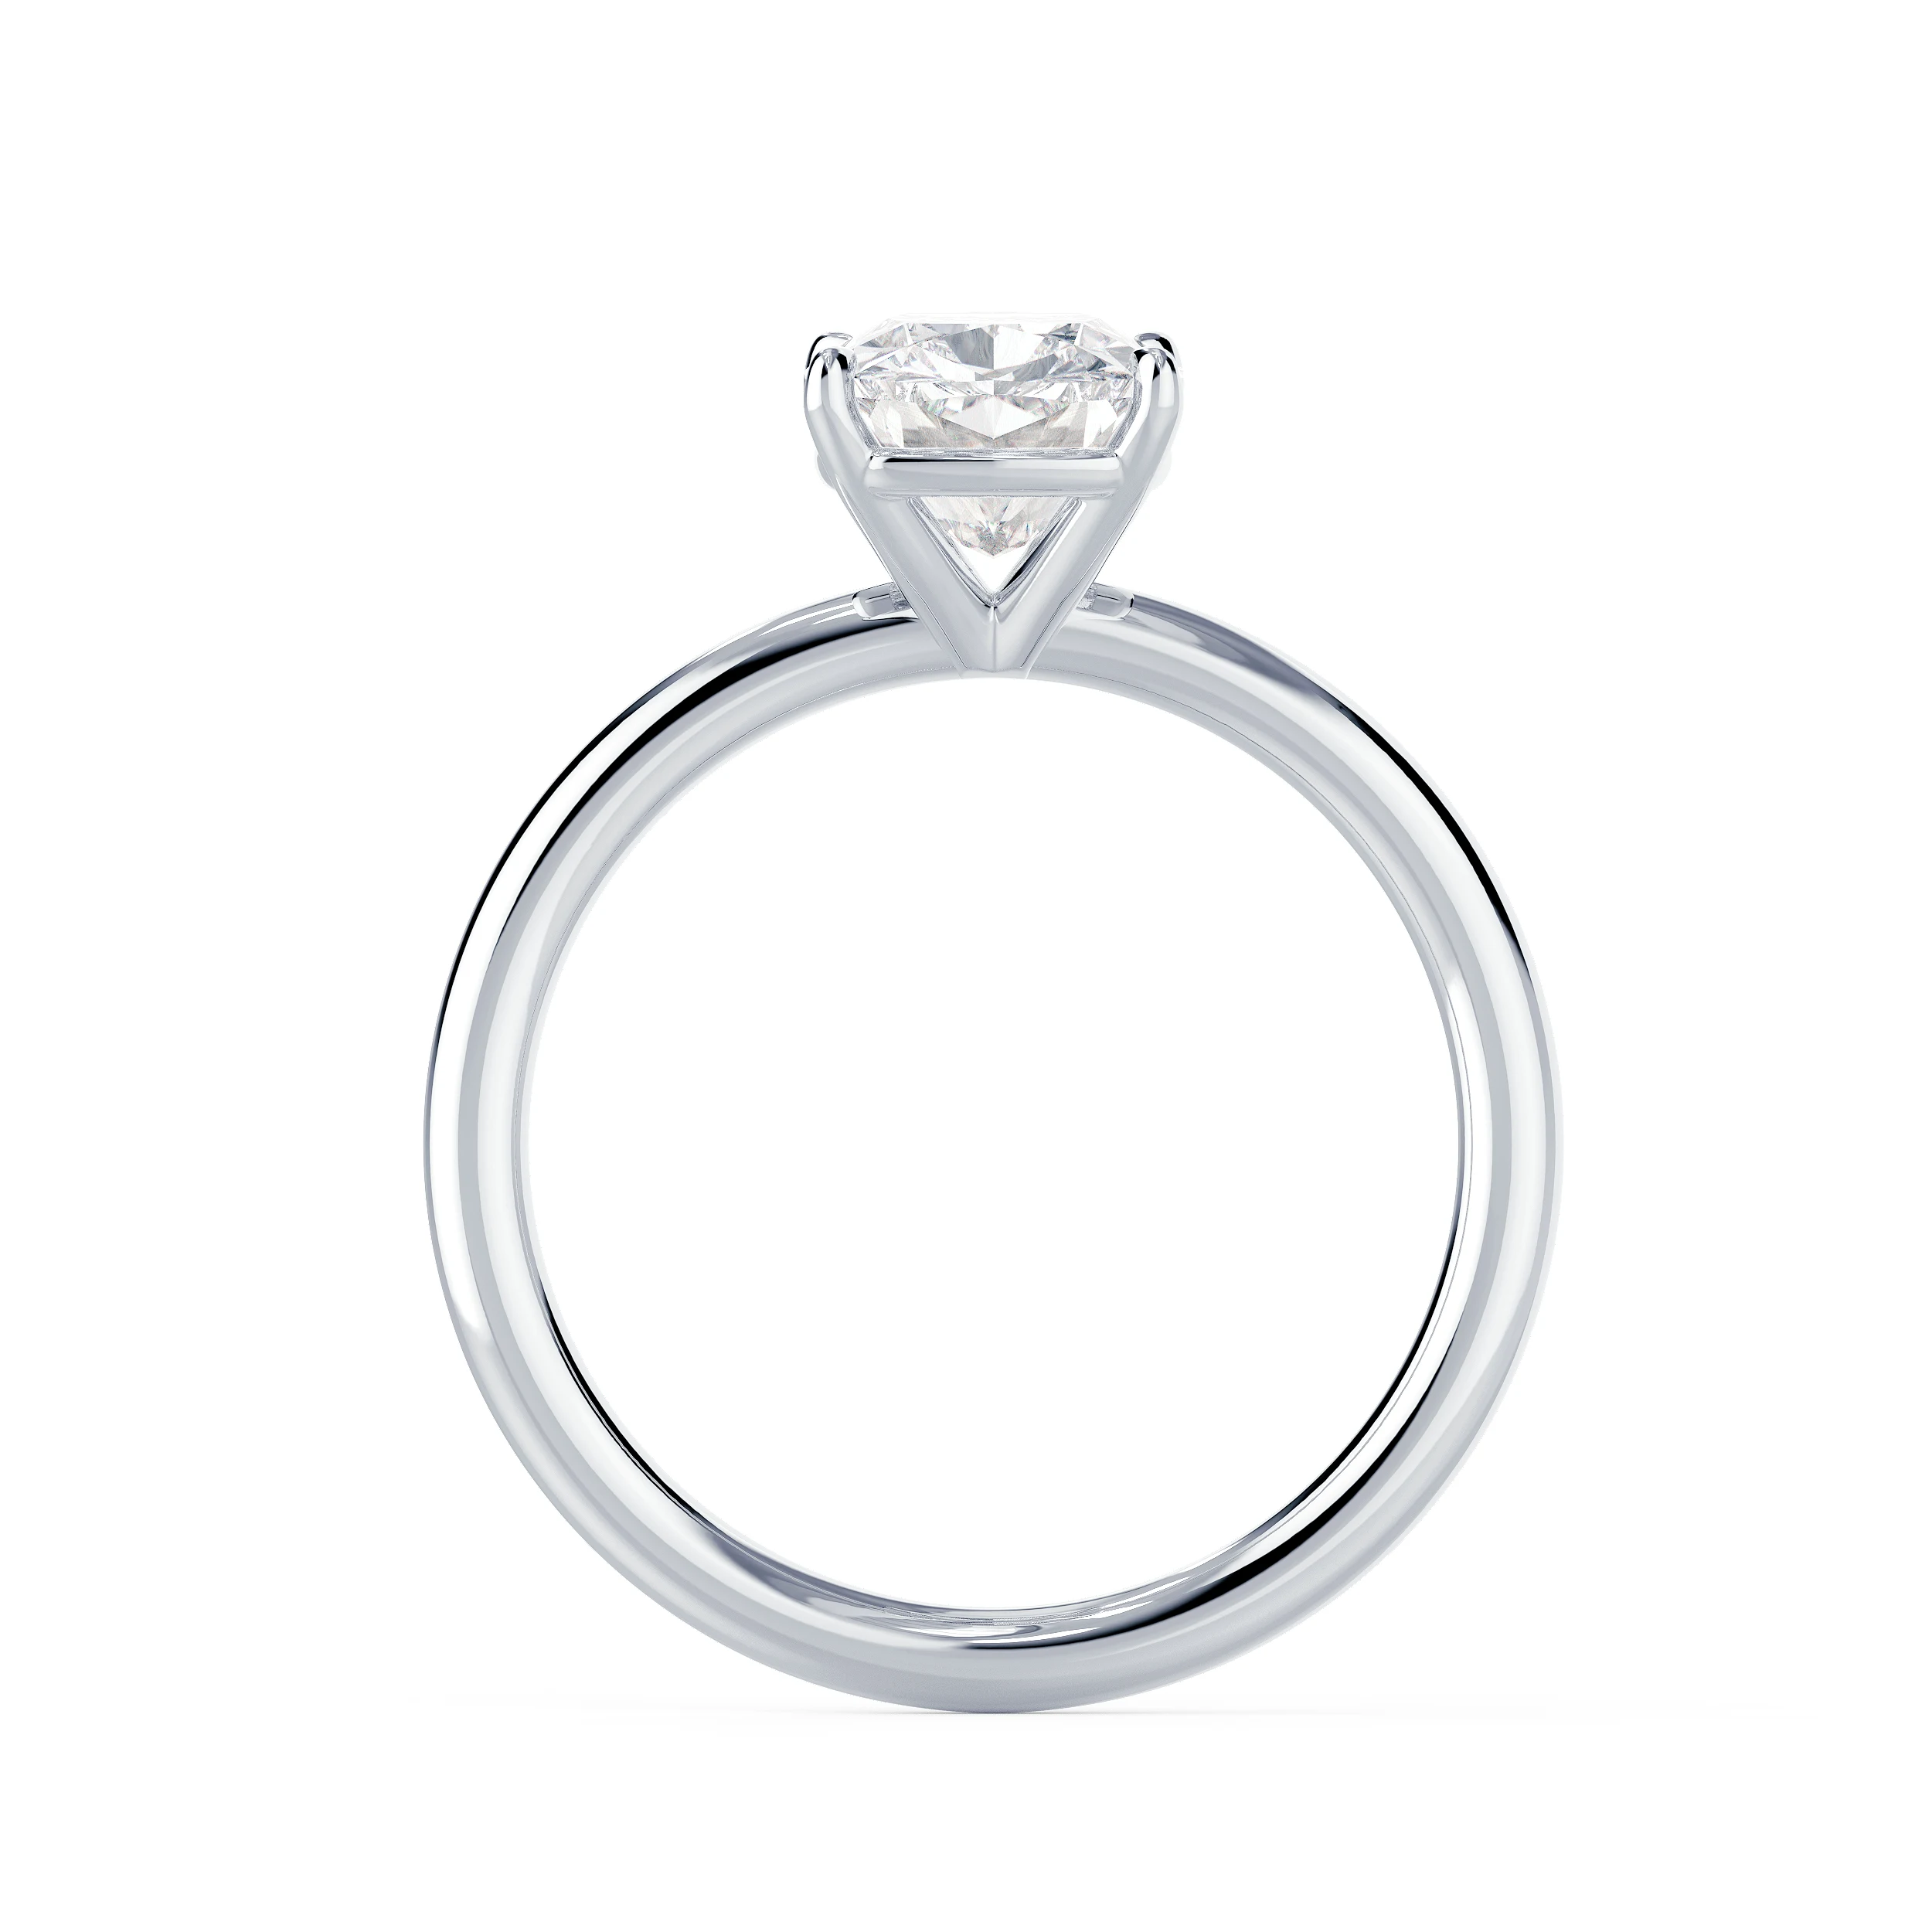 White Gold Cushion Petite Four Prong Solitaire featuring Lab Diamonds (Profile View)